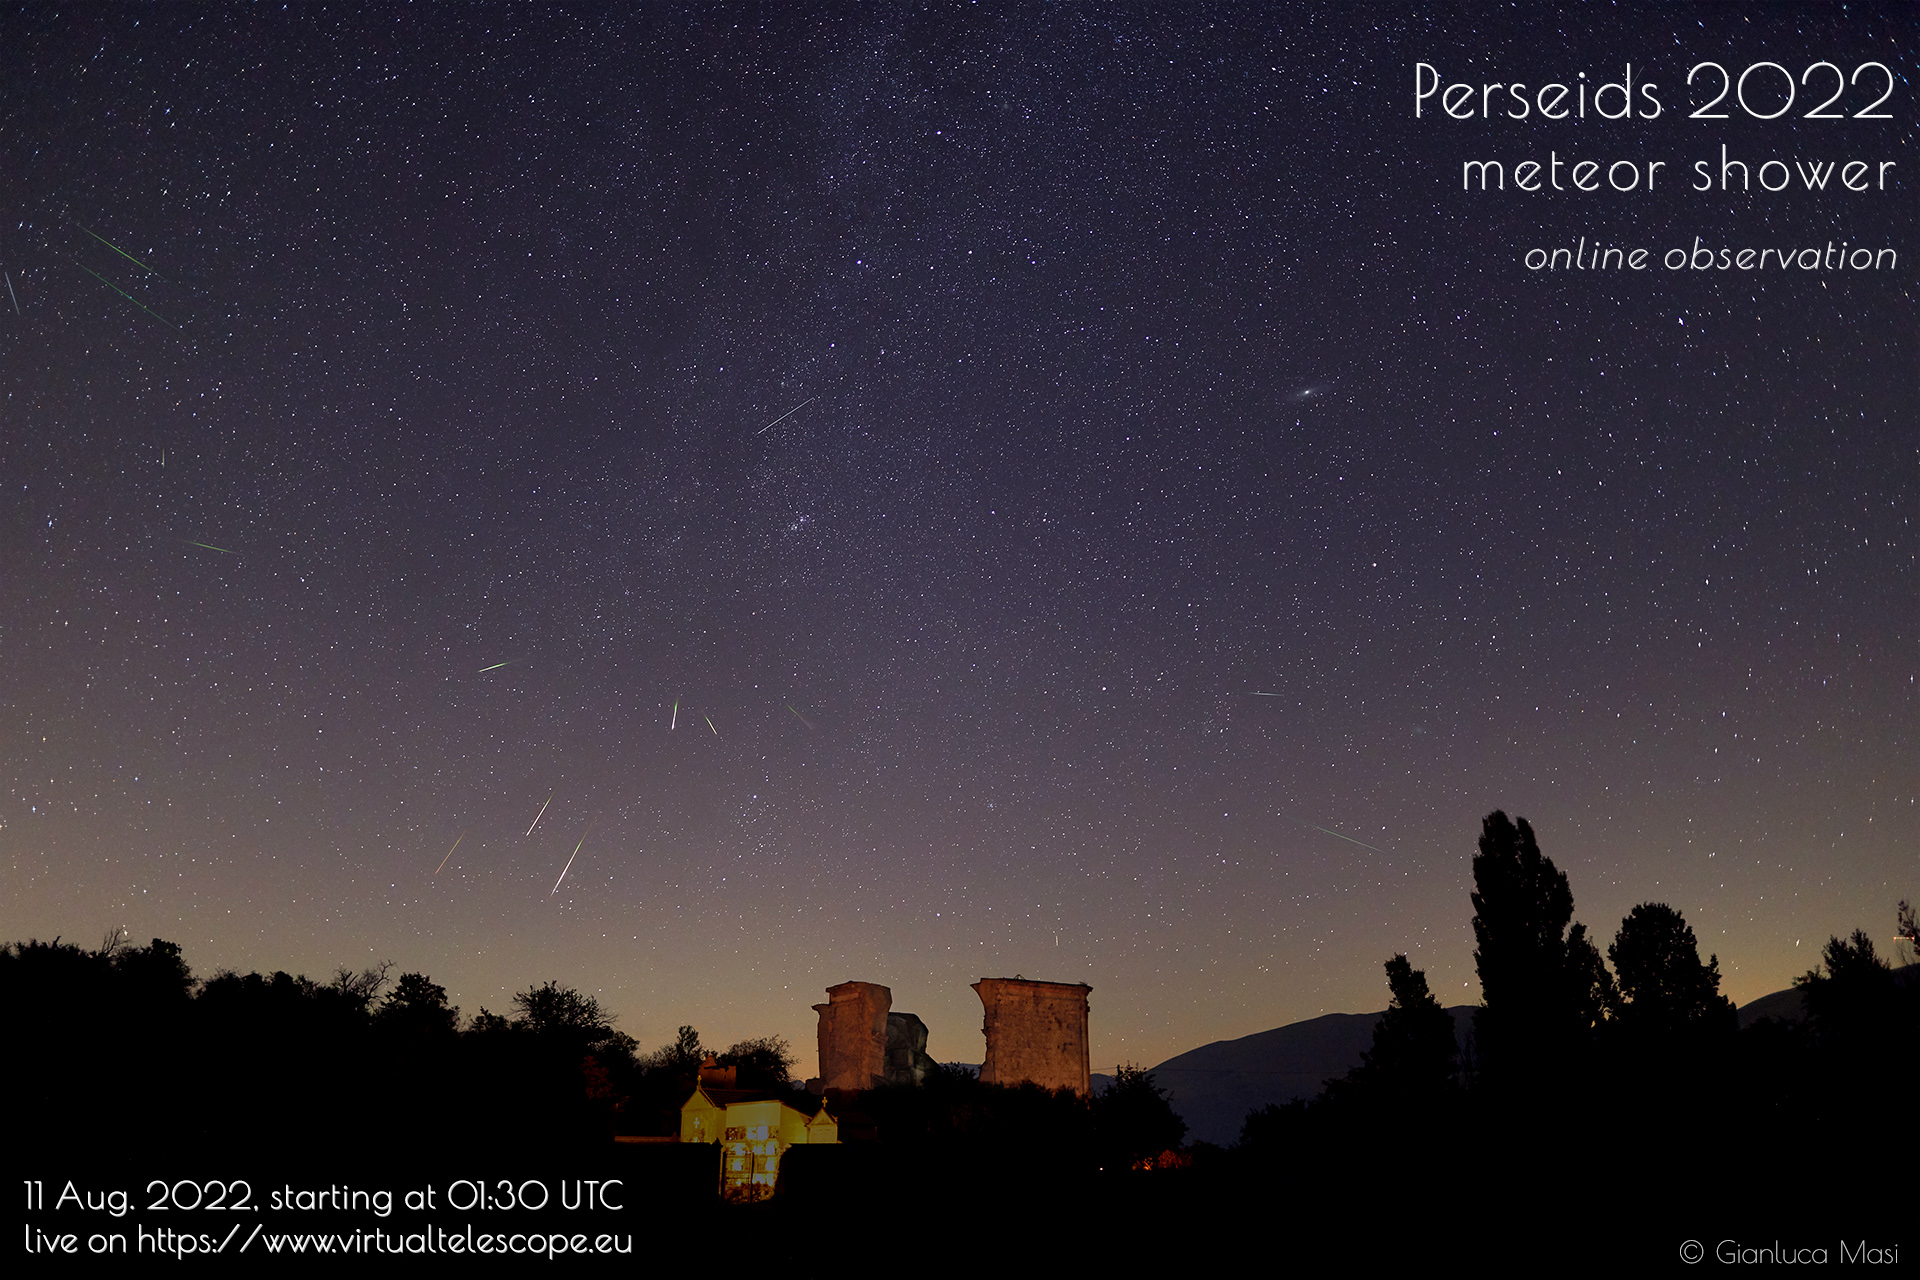 Perseids 2022: poster of the event.